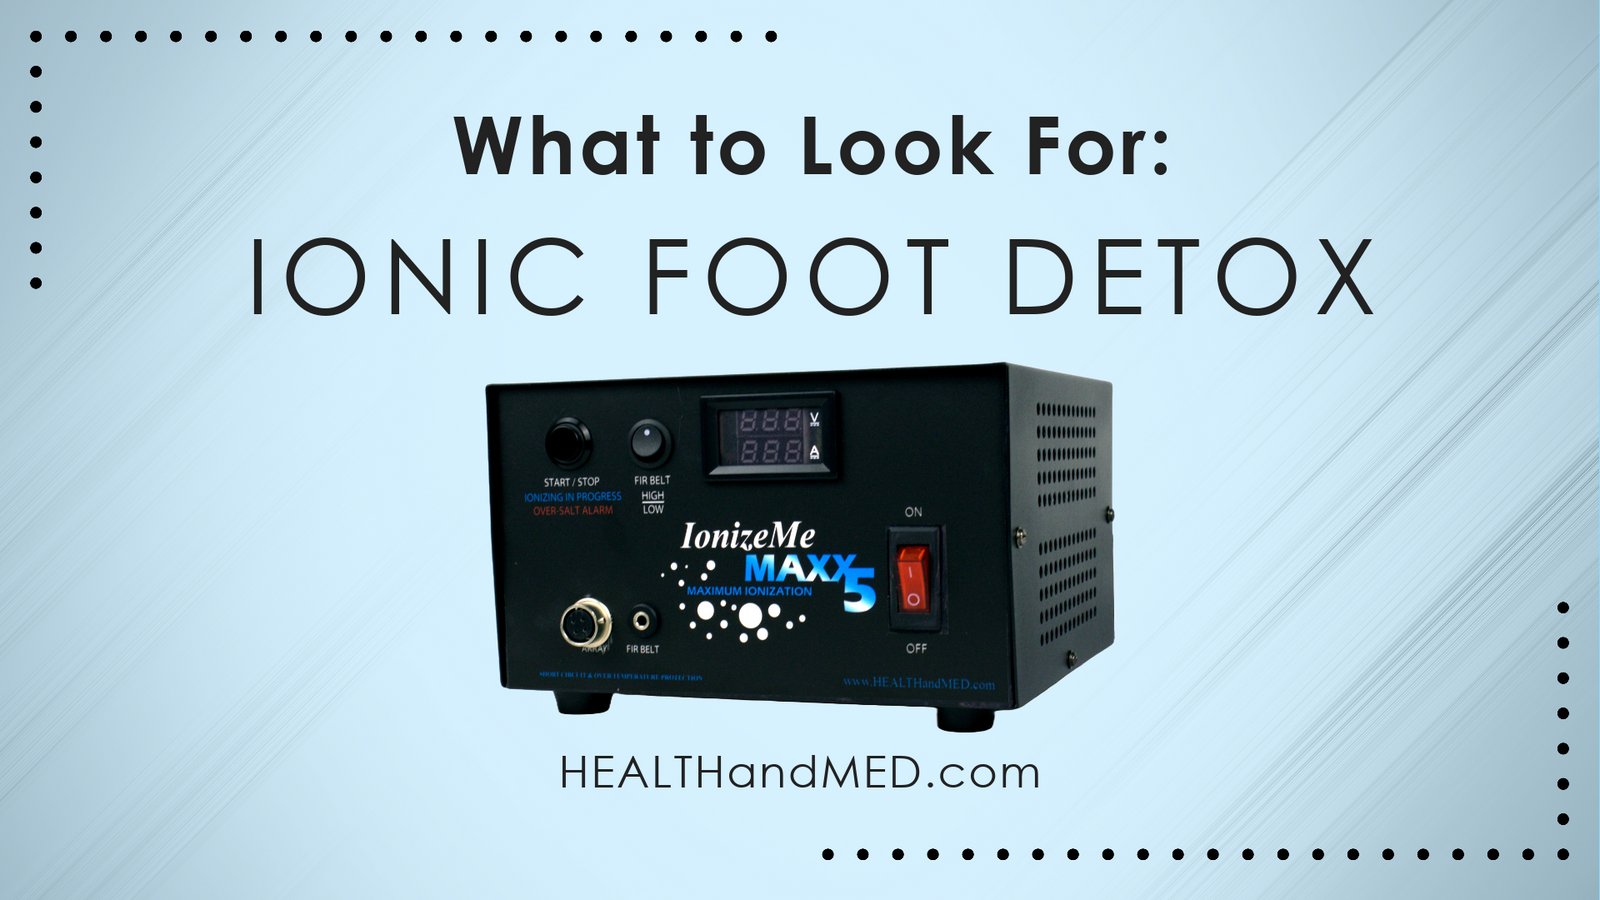 What to Look For When Shopping for an Ionic Foot Detox Machine